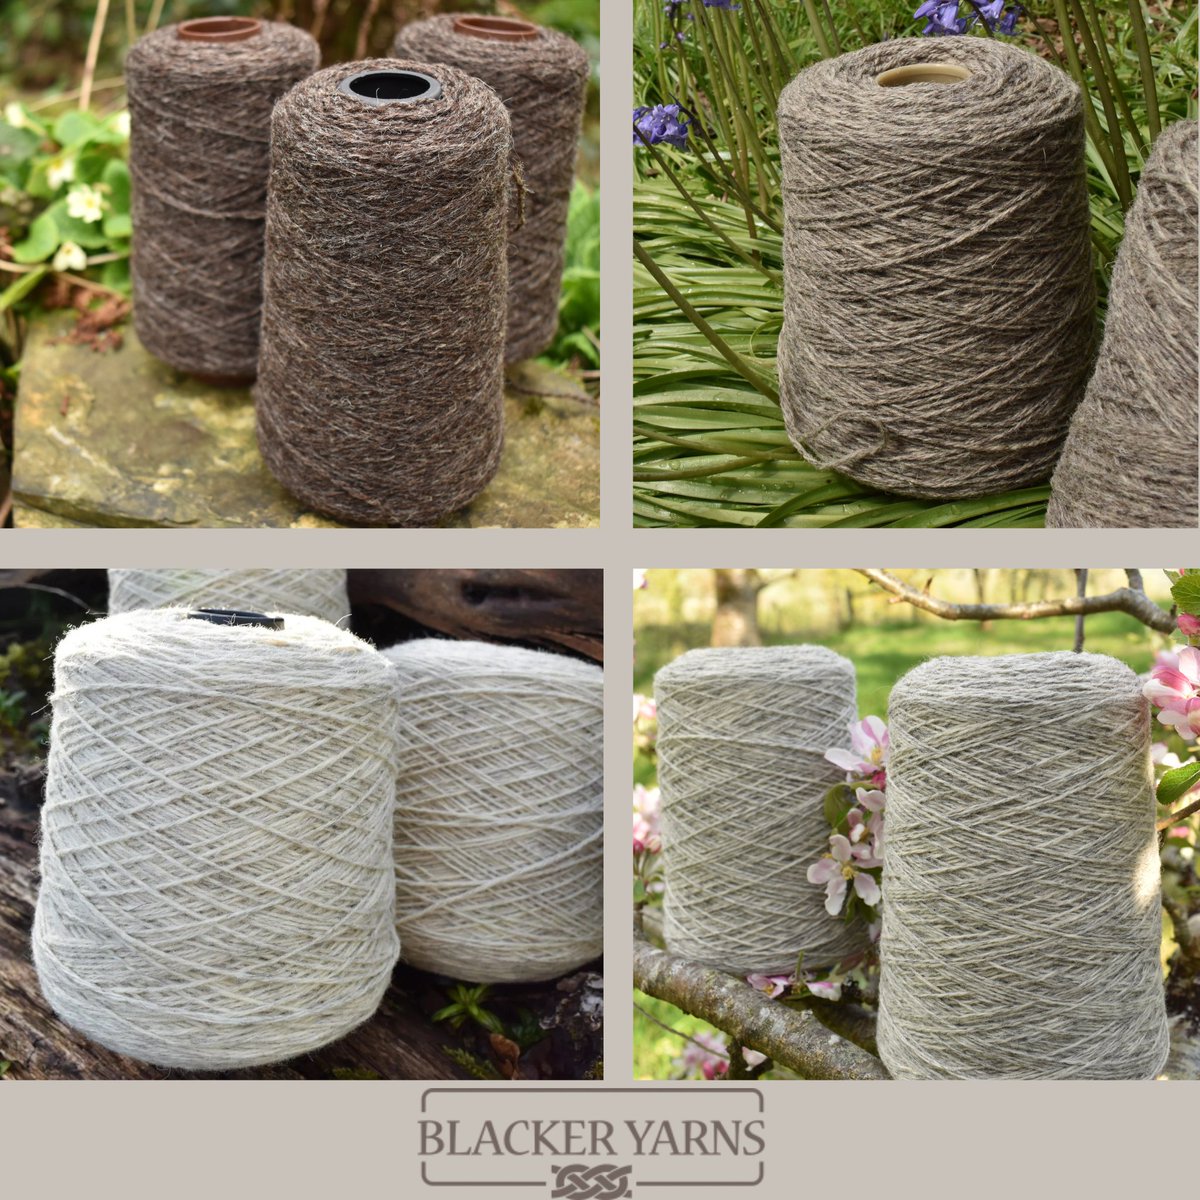 Our range of beautiful, specially selected, undyed British Breed yarns on cone include Black Welsh Mountain, Corriedale/Gotland, Jacob, Shetland to Merino and Alpaca wool. Oiled on cone yarn is ideal for hand dyeing, knitting and crocheting. 
blackeryarns.co.uk/yarn-on-cone/